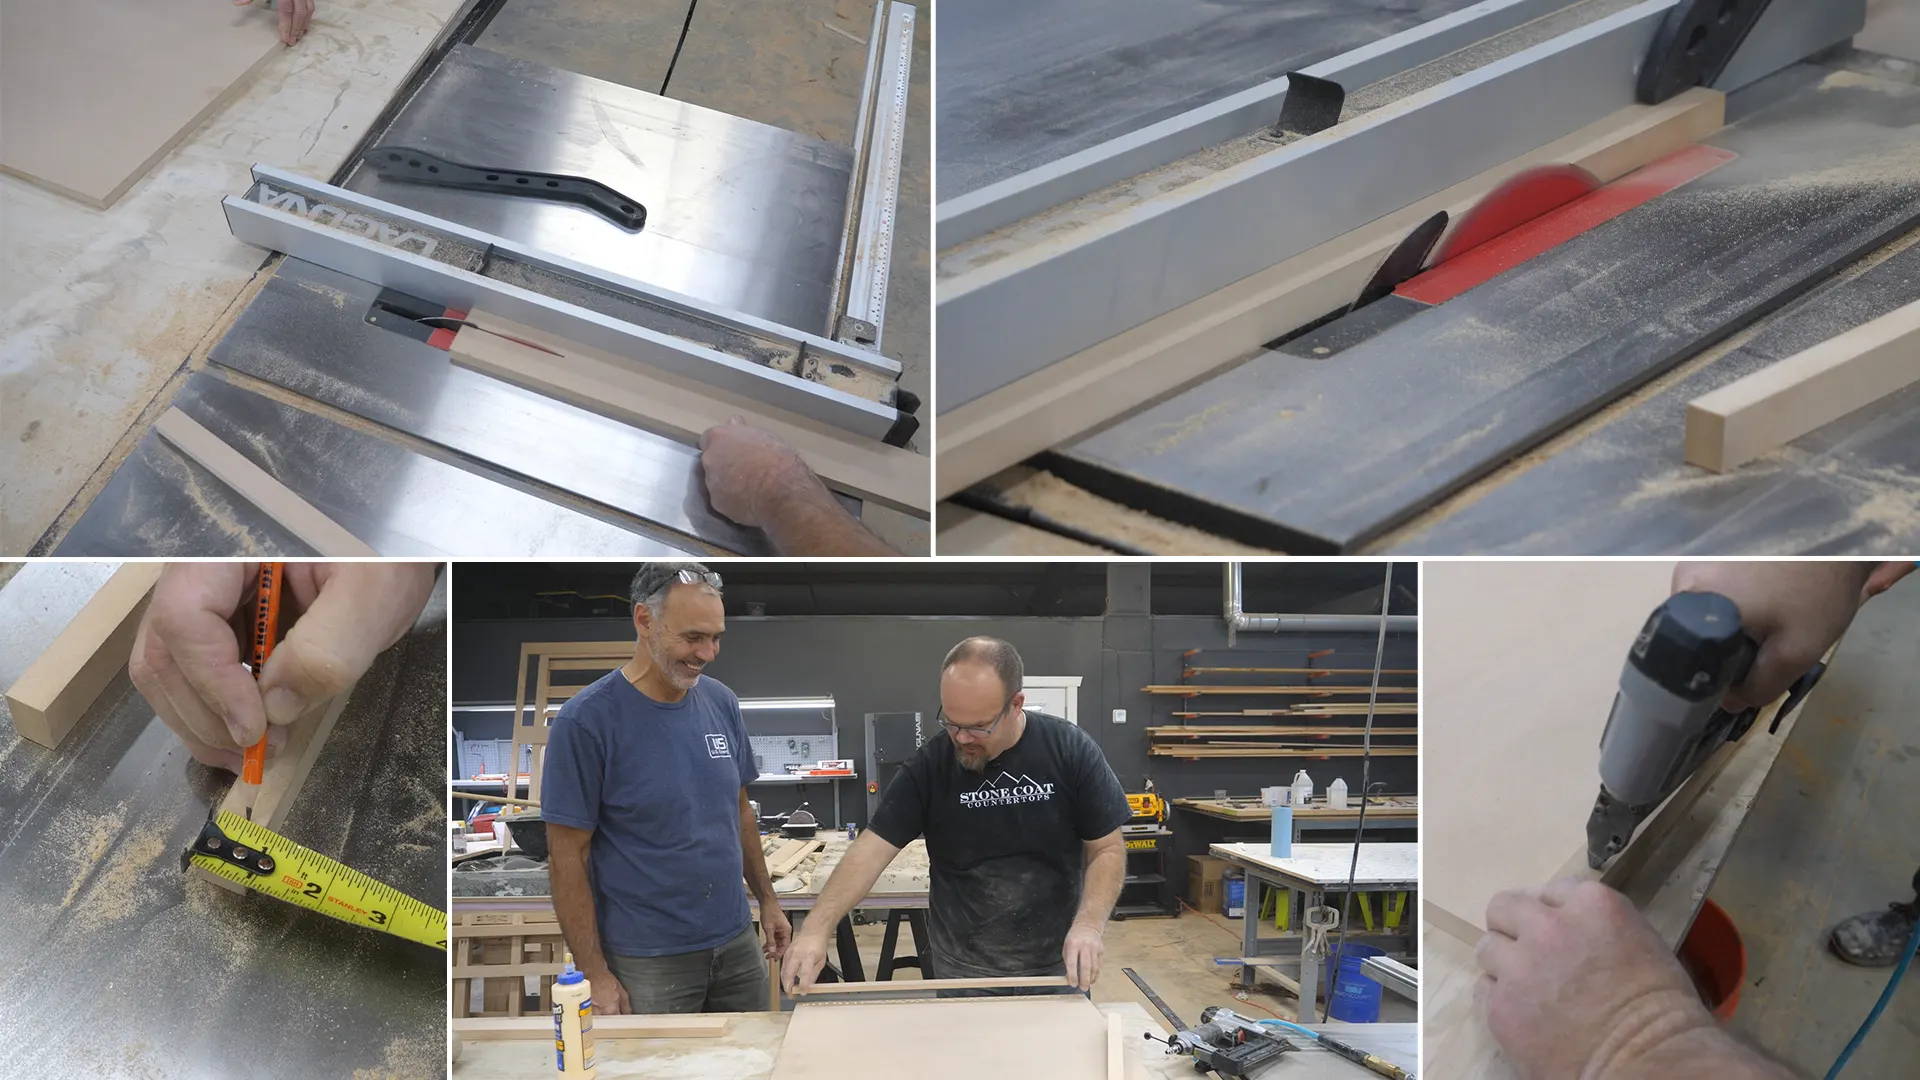 Creating a substrate with MDF for the project, bonding with wood glue, and securing with 1 ¼ inch 23 gauge pin nails.